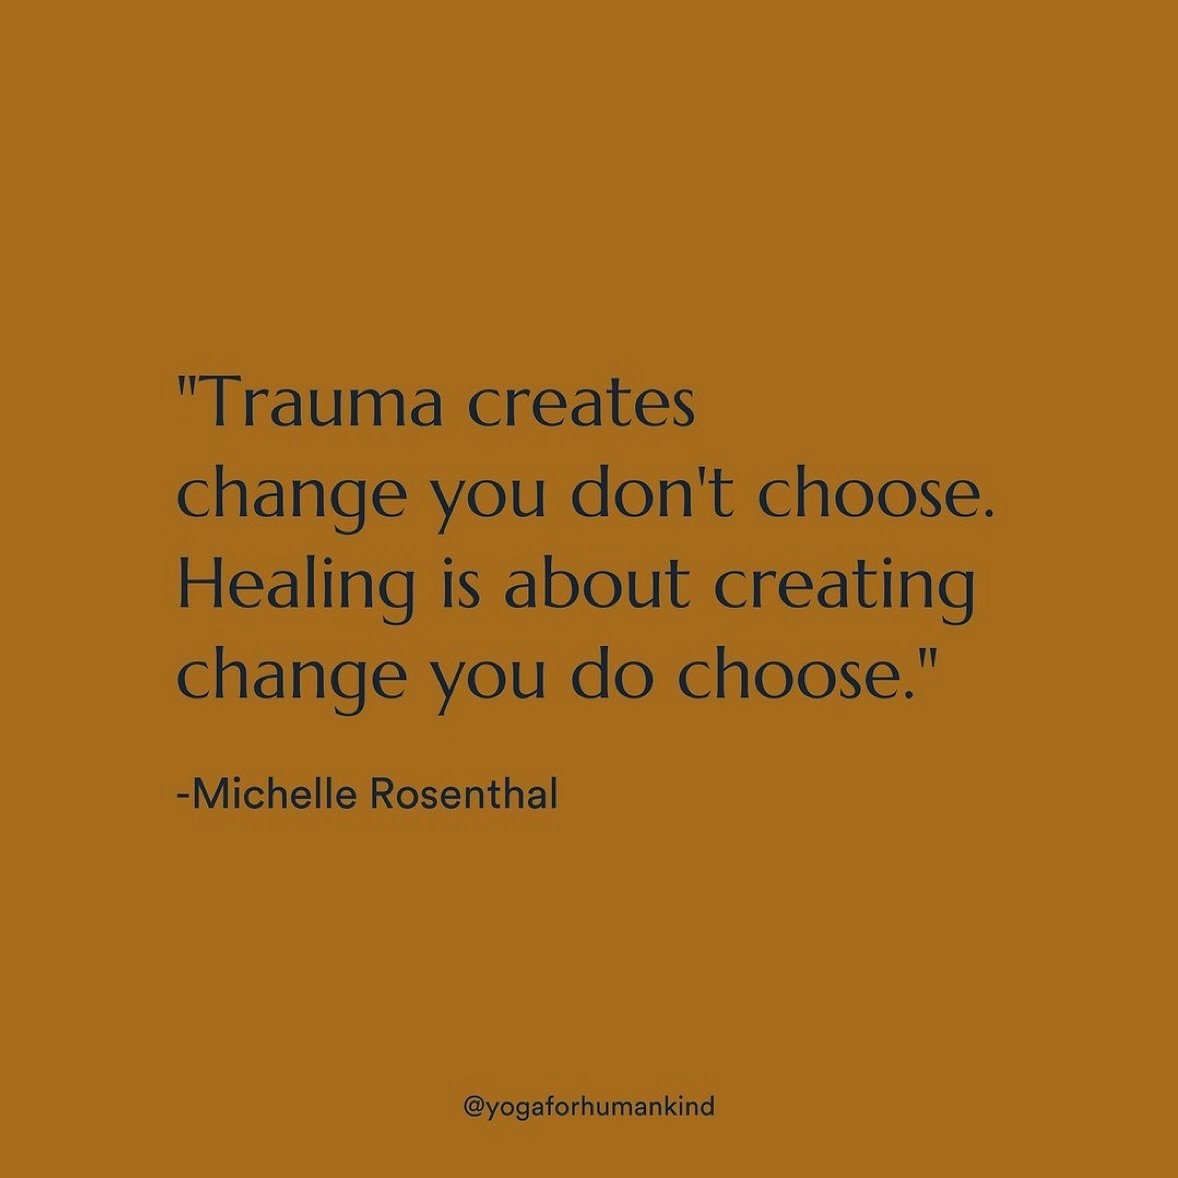 Saturday Collective Thought: 
&ldquo;We do not learn from experience. We learn from reflecting on experience.&rdquo; #johndewey

📸 Repost from @yogaforhumankind Your trauma doesn&rsquo;t define you. Healing is about reclaiming your sense of self and